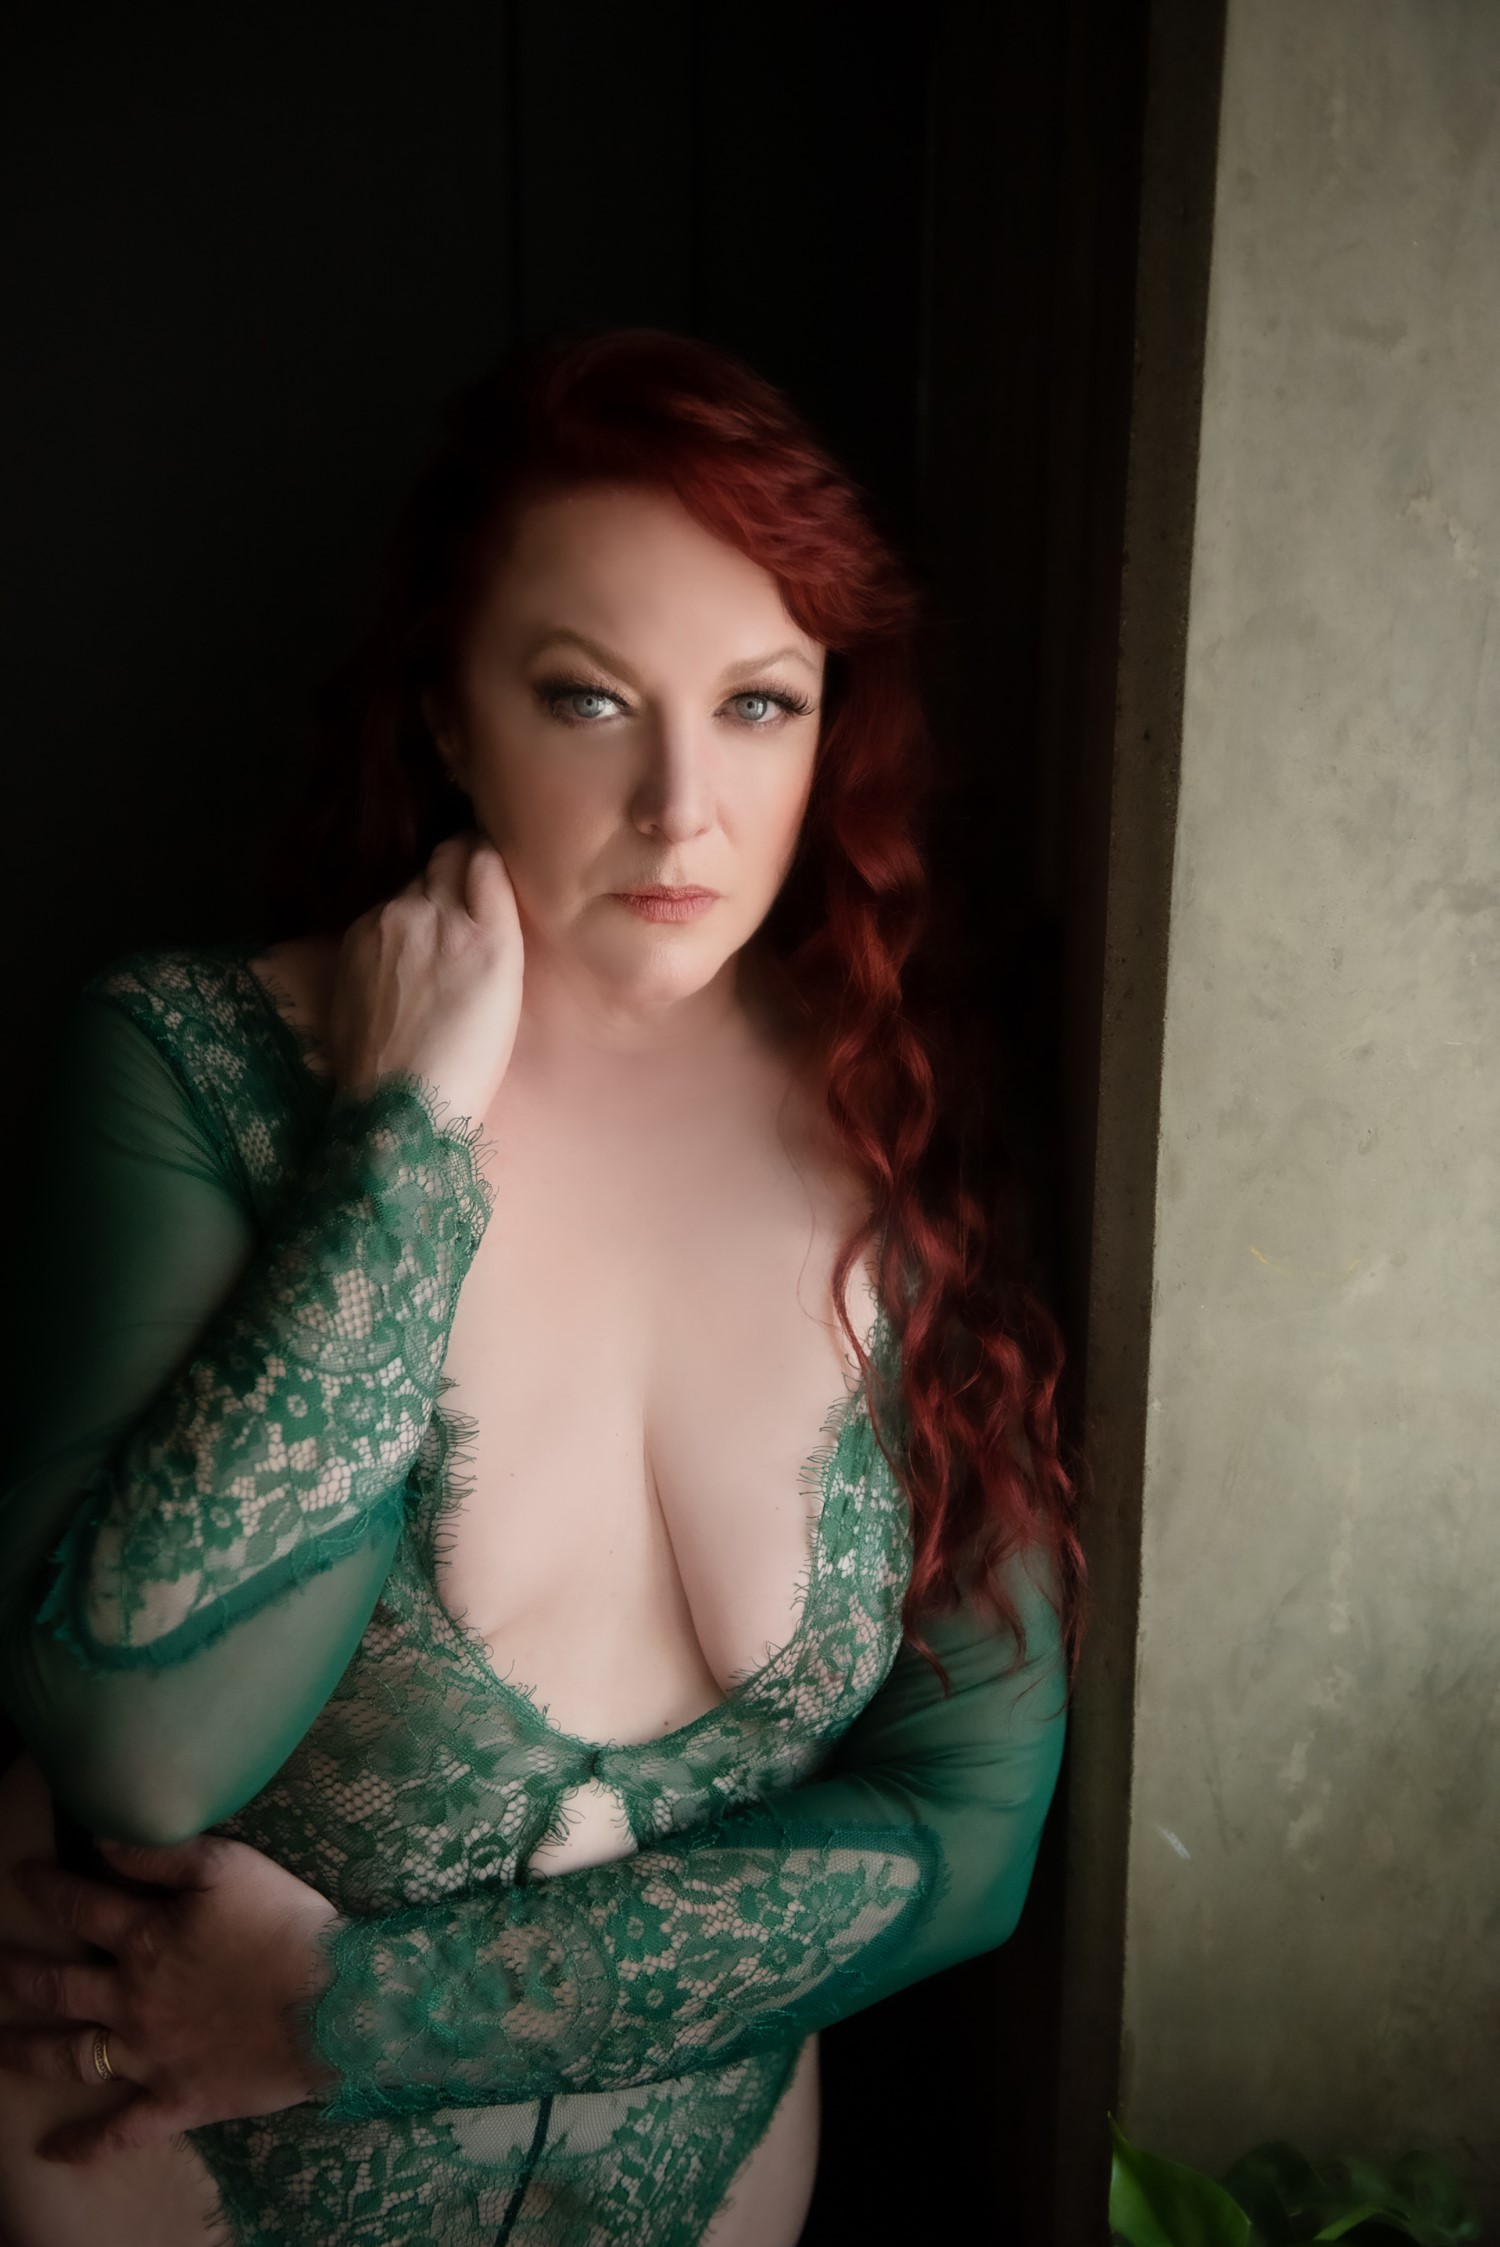 red-haired woman wearing emerald green lingerie